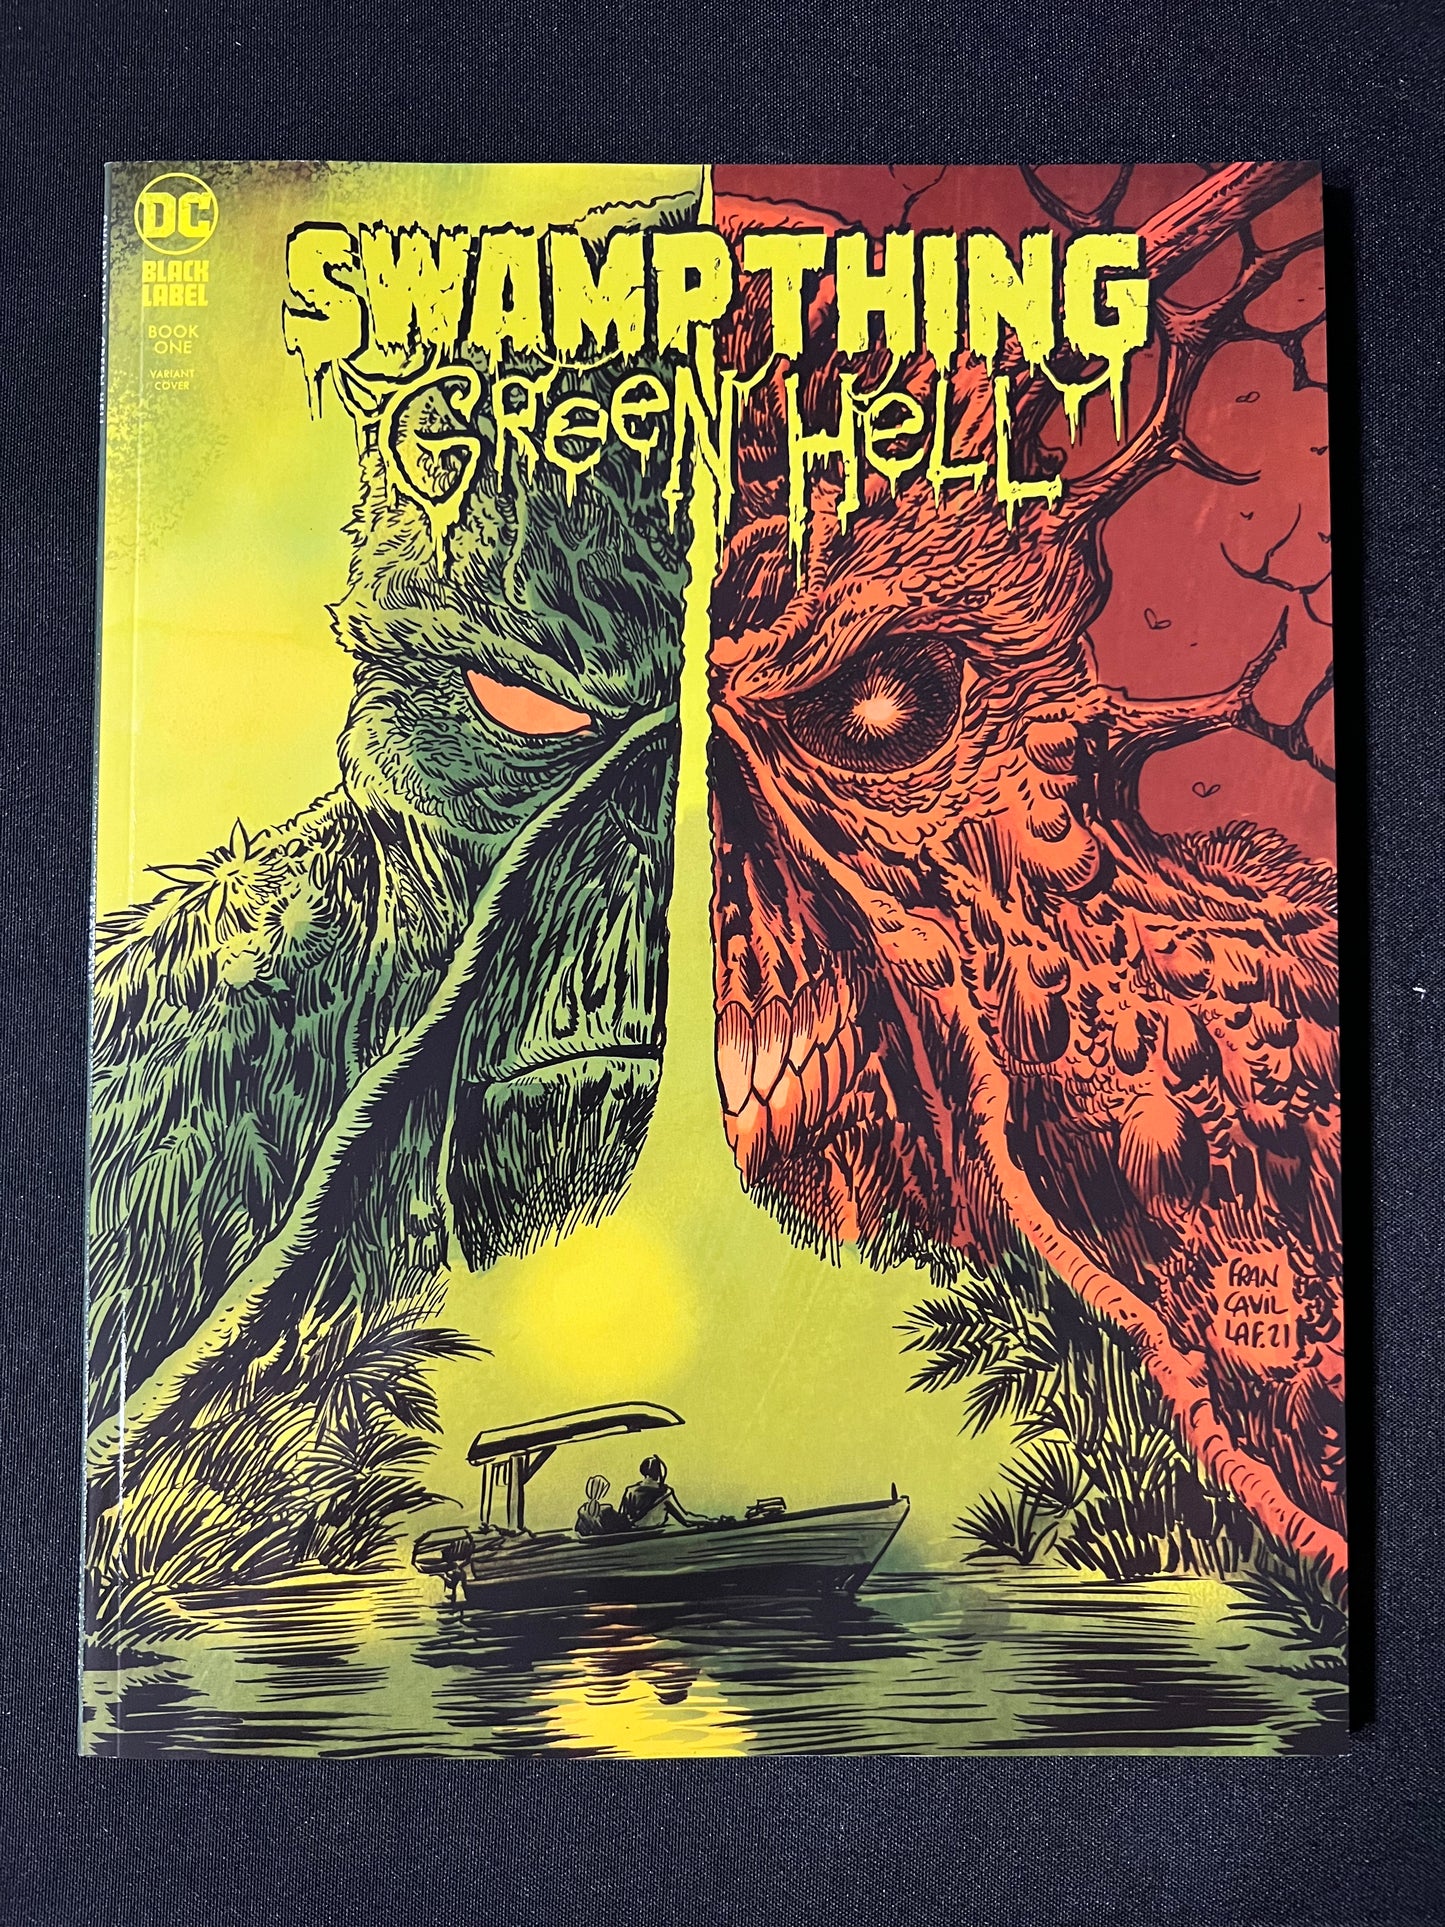 Swamp Thing Green Hell #1 1:25 Variant